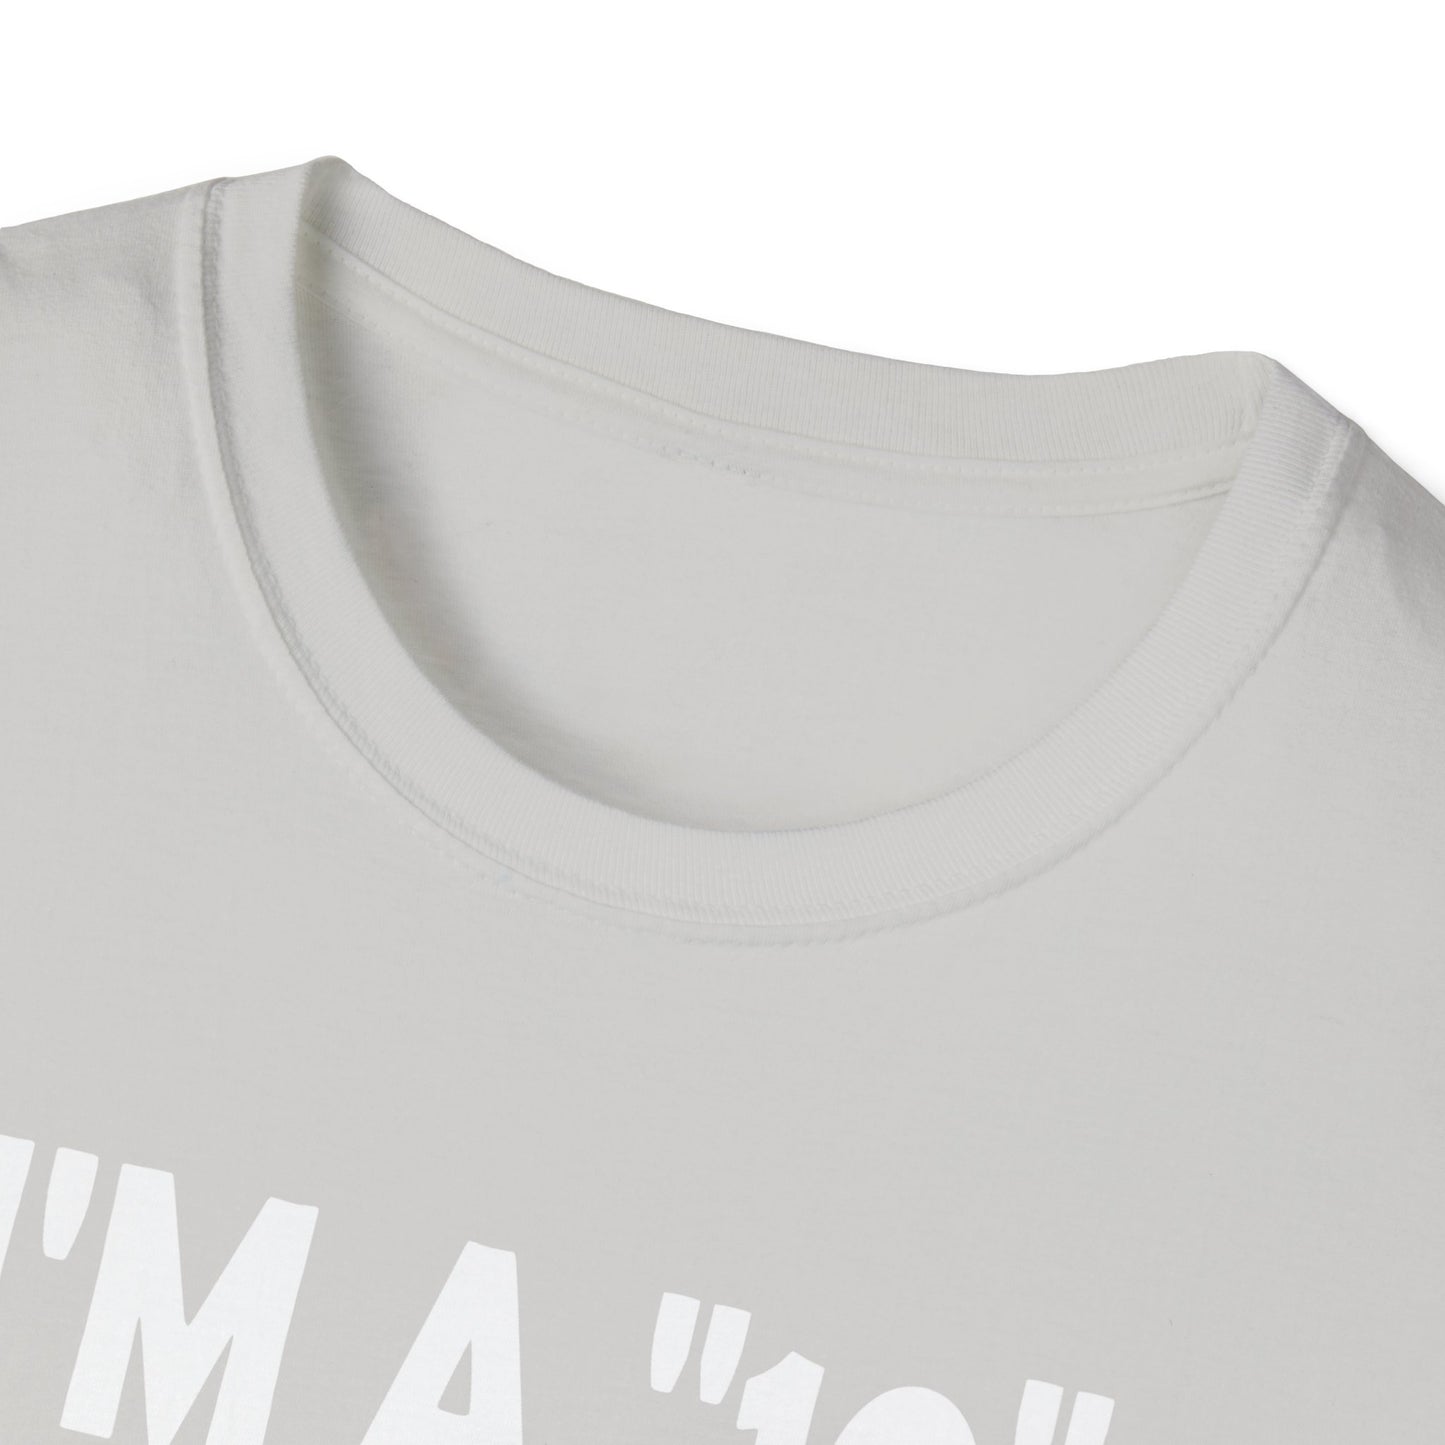 I'm a 10 but I always roll a 1 - White - Unisex Softstyle T-Shirt